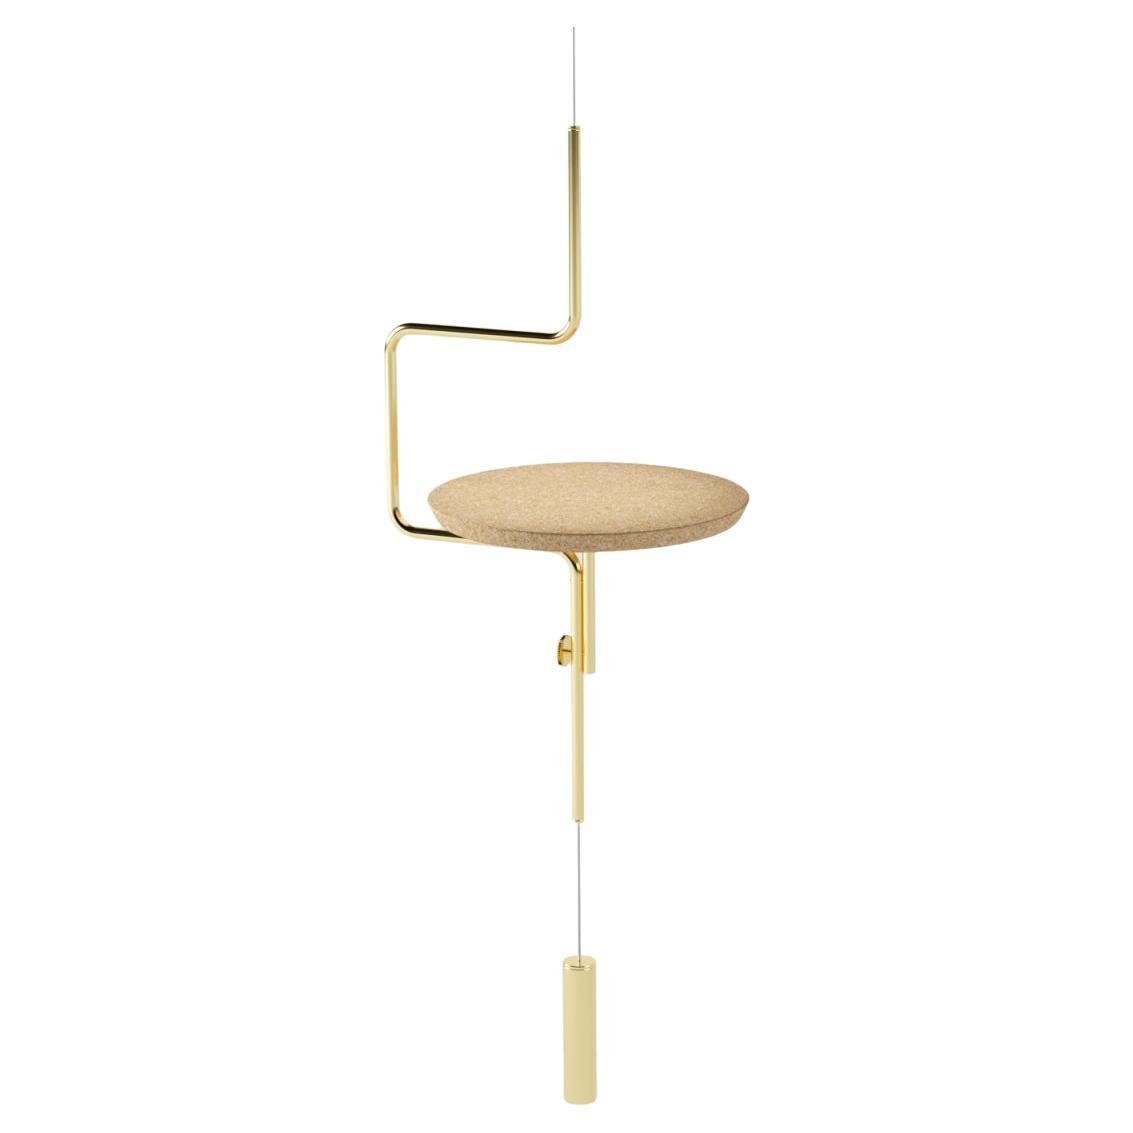 Disco Hanging Table Brass and Natural Cork by by decarvalho atelier